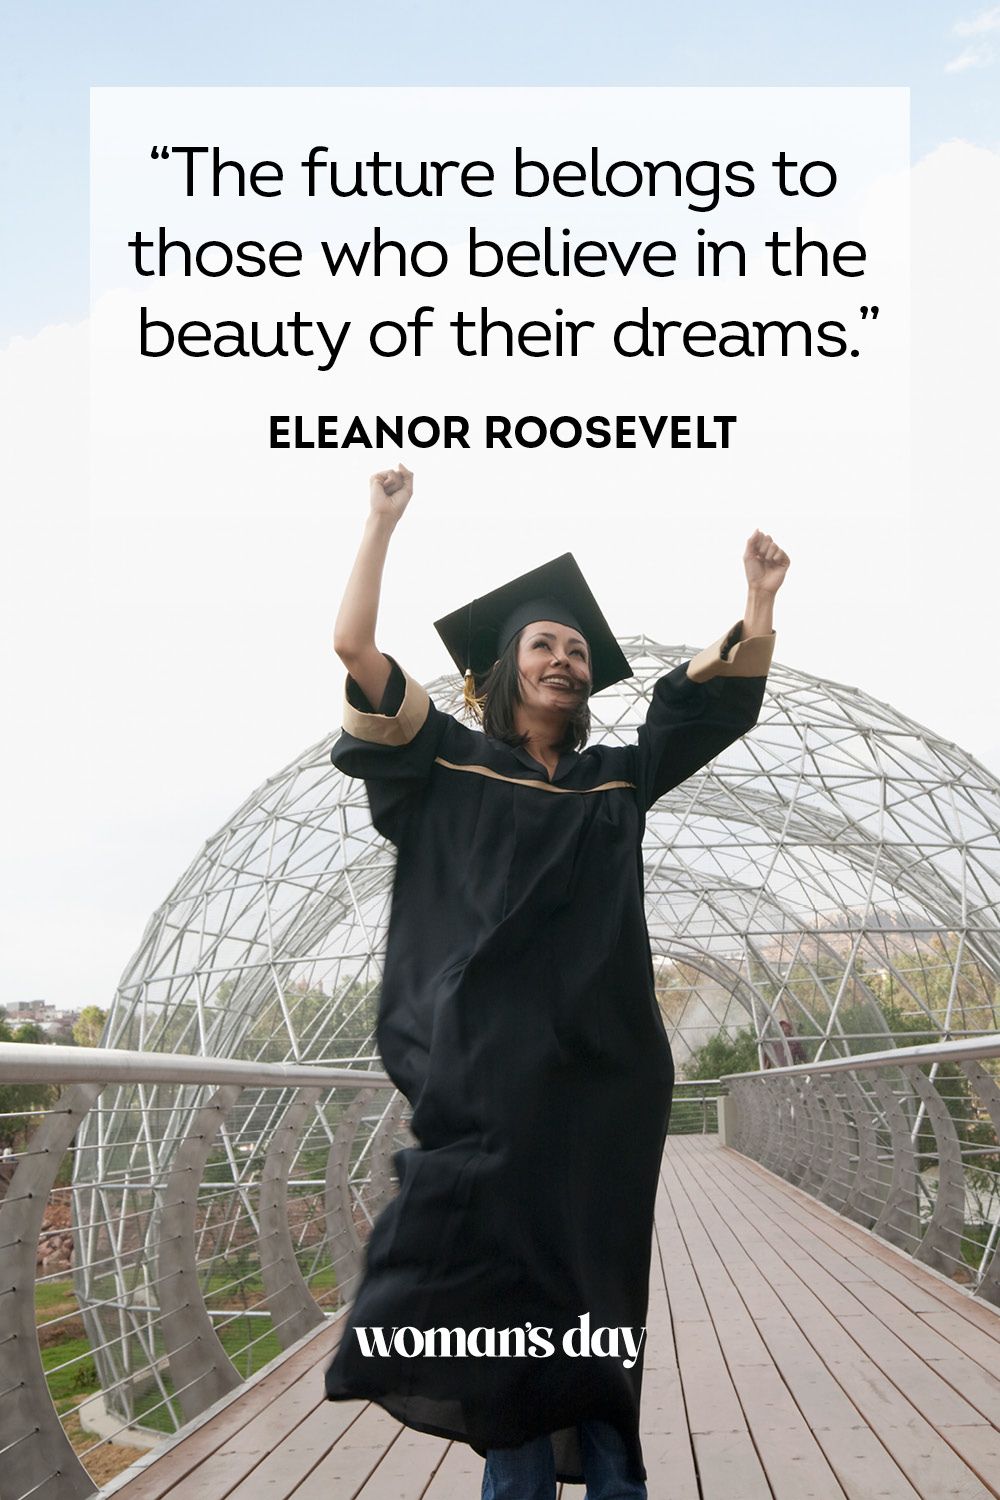 graduation quotes and sayings